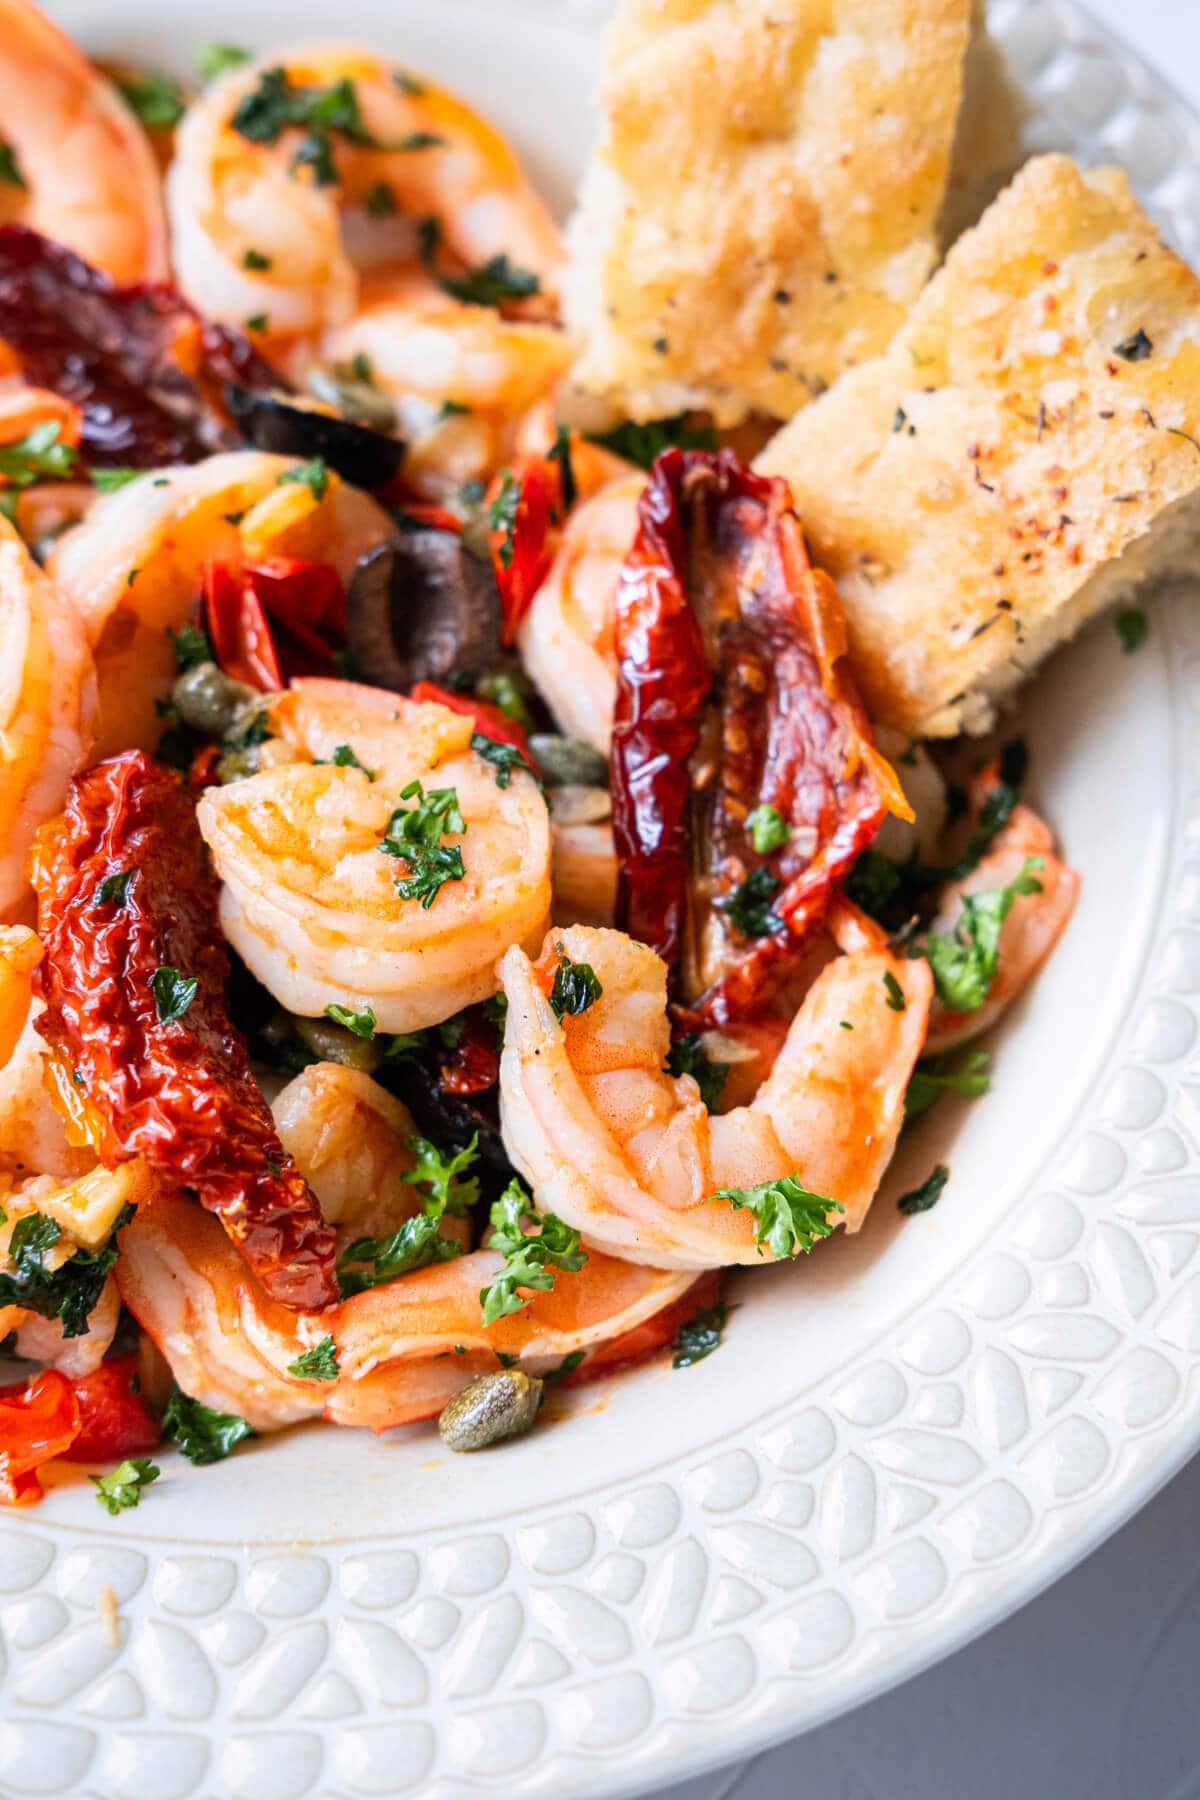 Large shrimp with olive oil and sun dried tomato sauce, and two slices of focaccia. 